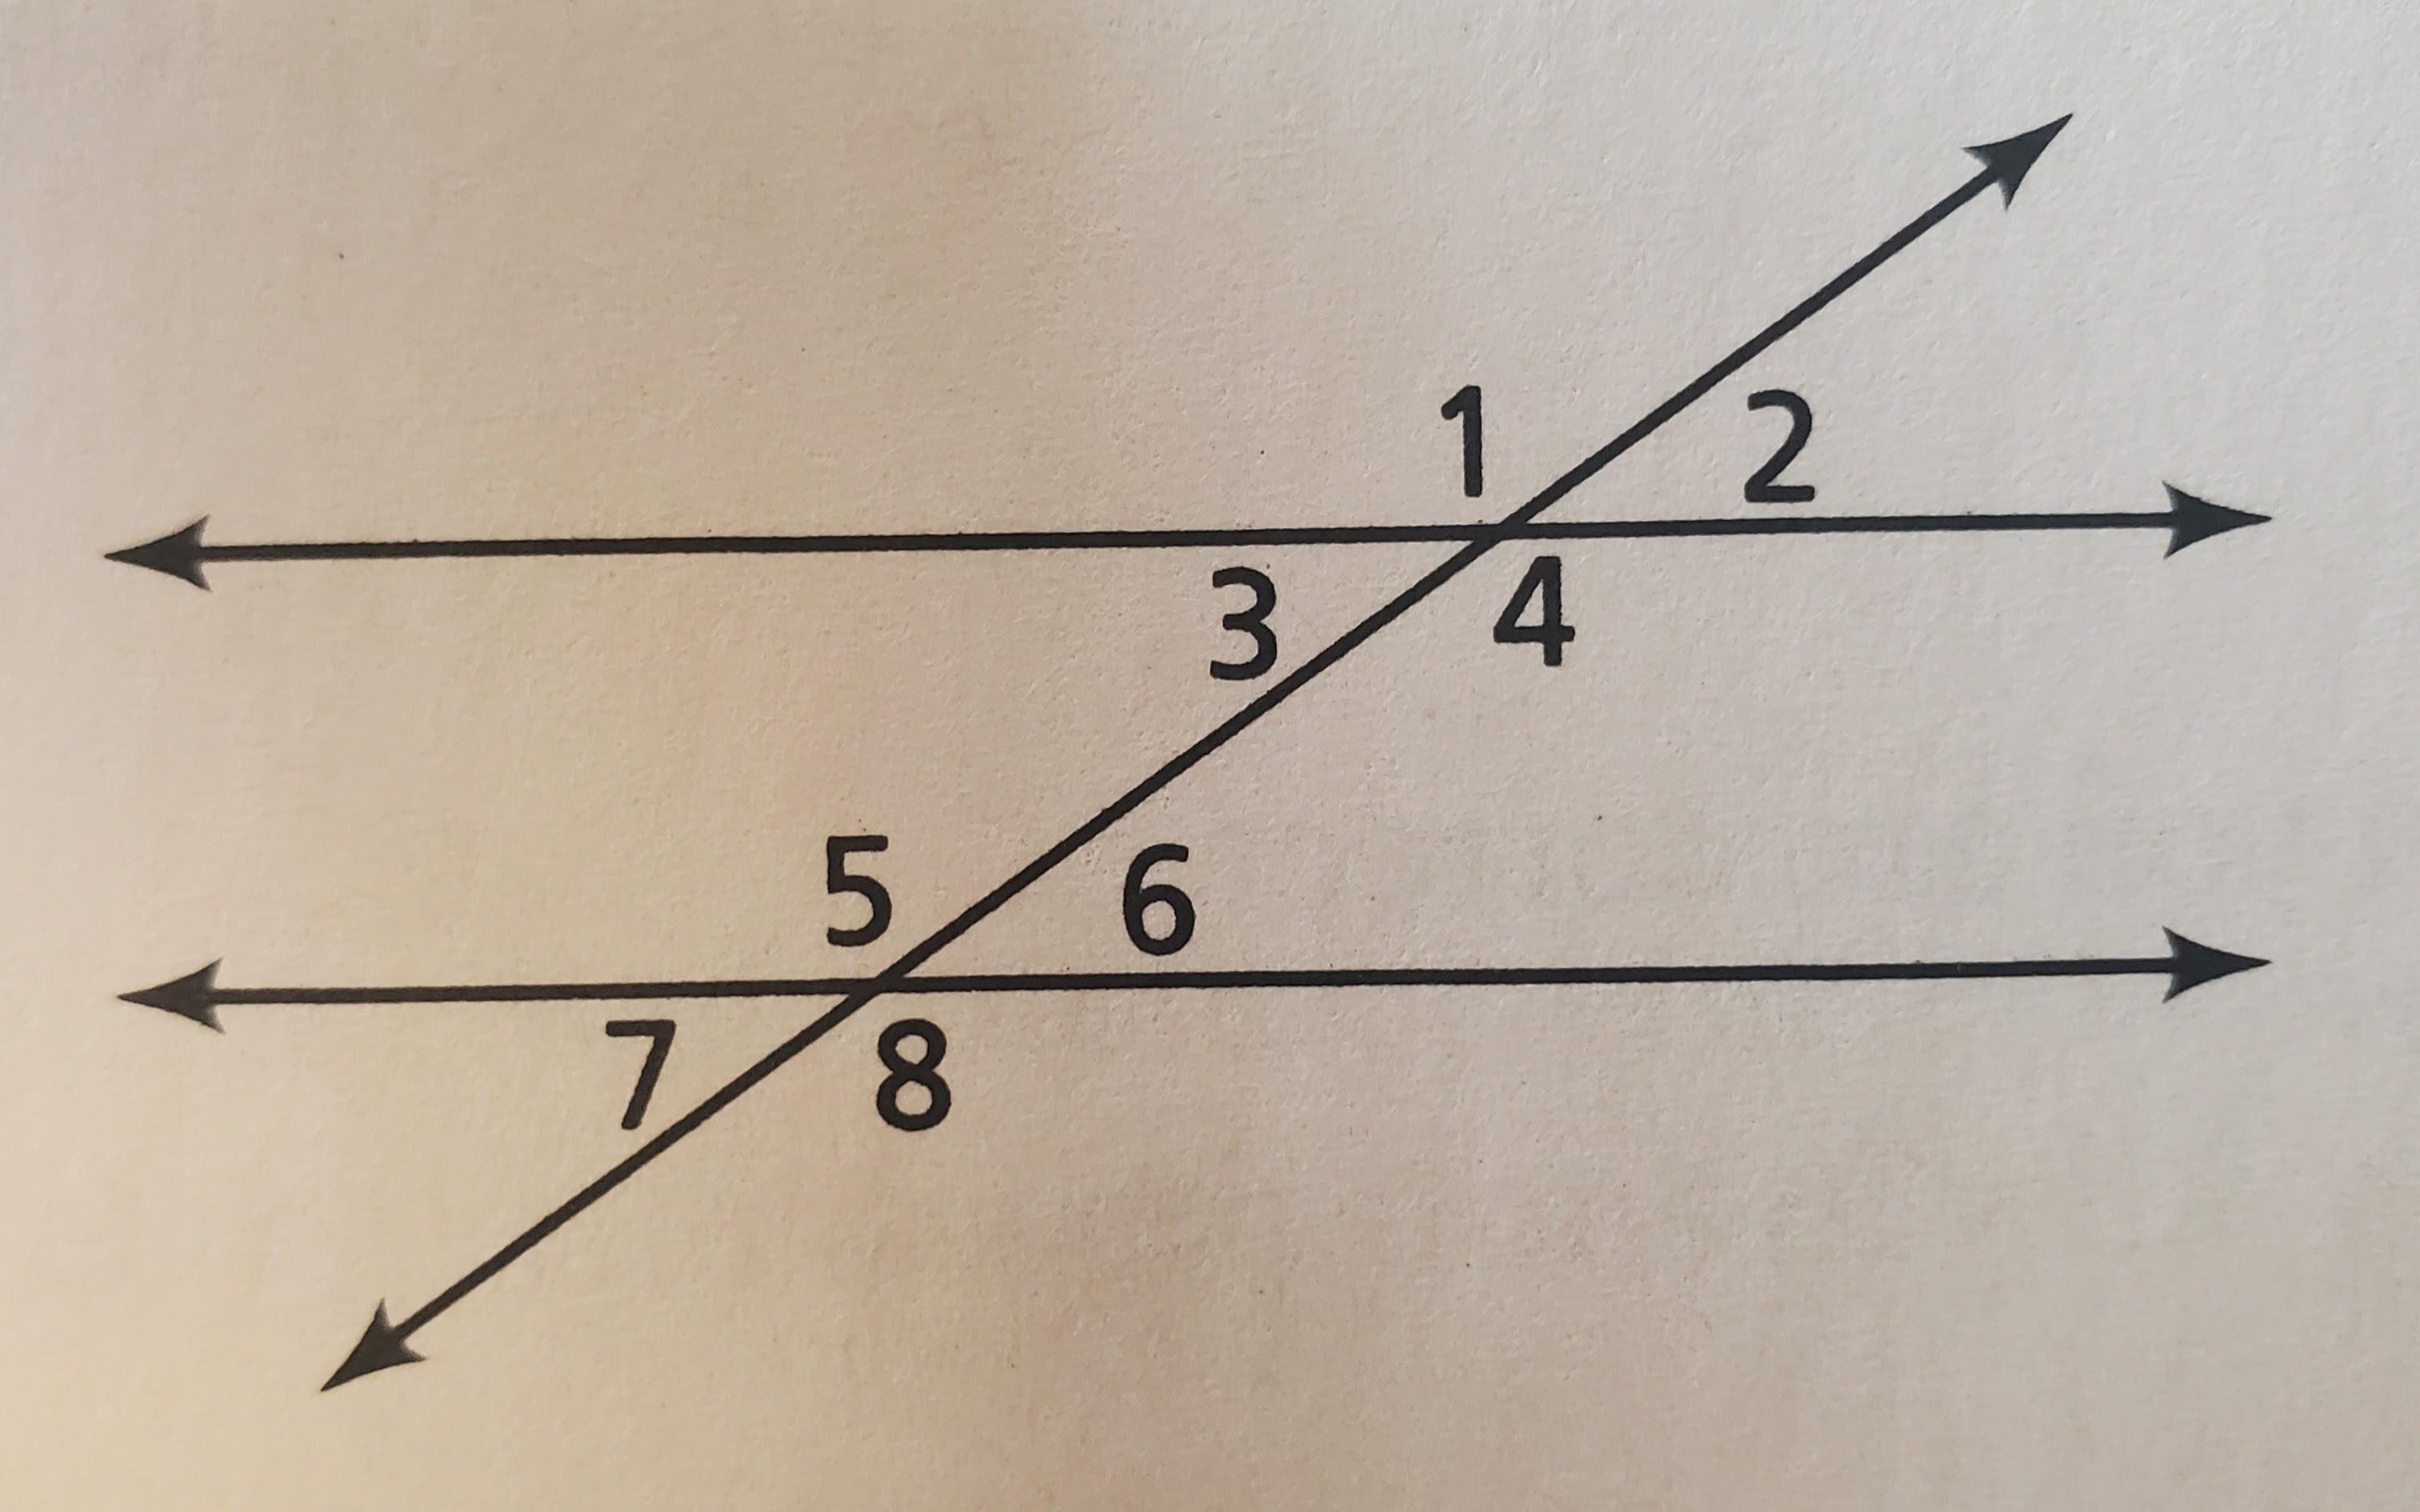 Need Help PleaseWhat Is The Measure Of Angle 1?What Is The Measure Of Angle 3?What Is The Measure Of